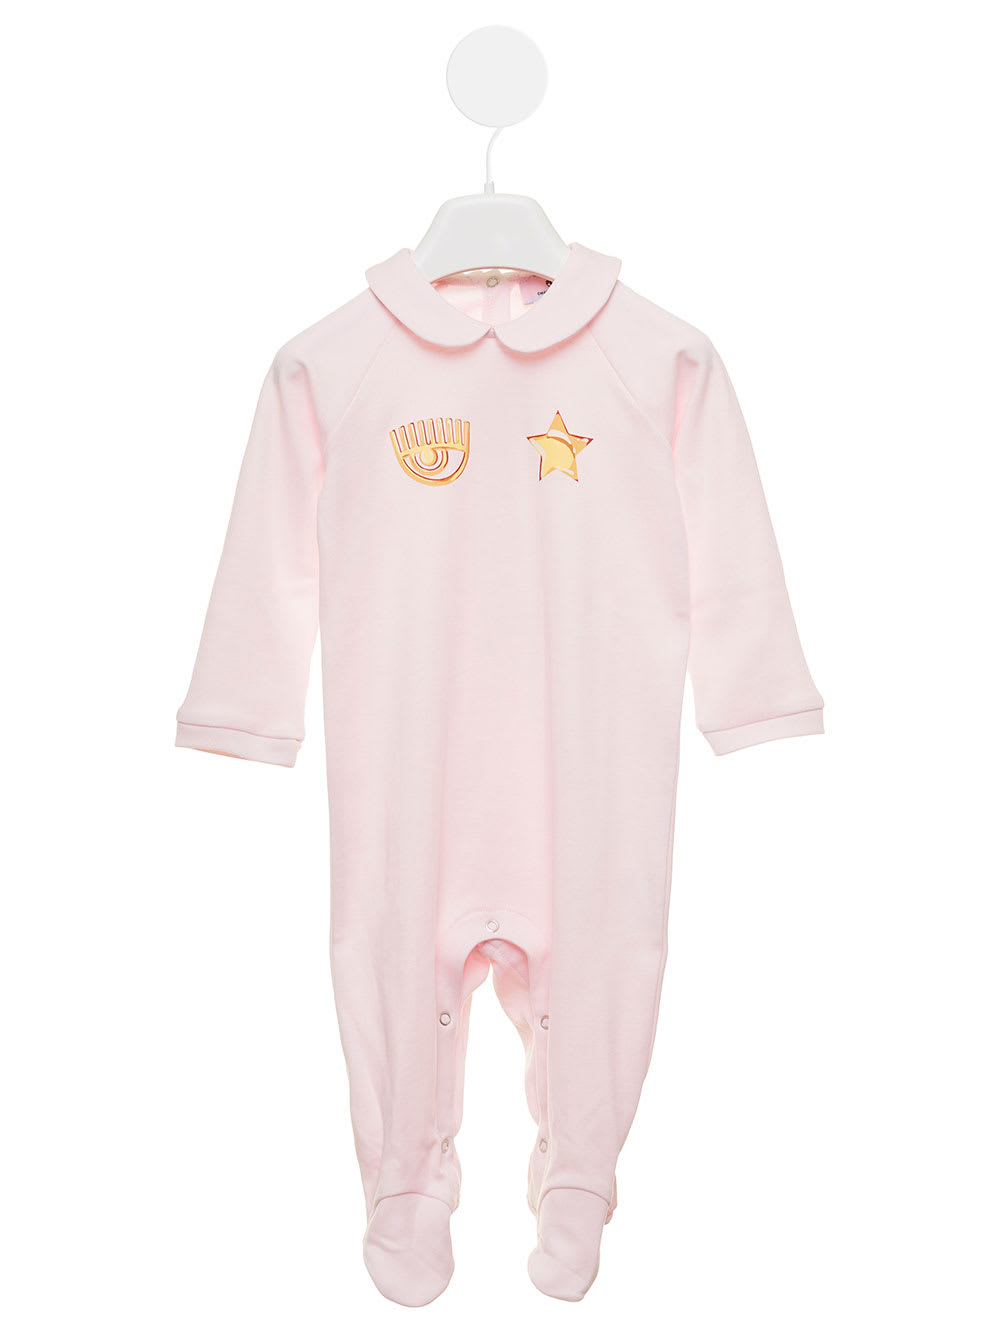 Chiara Ferragni Light Pink Cotton Body Suit With Gold Printed Logo